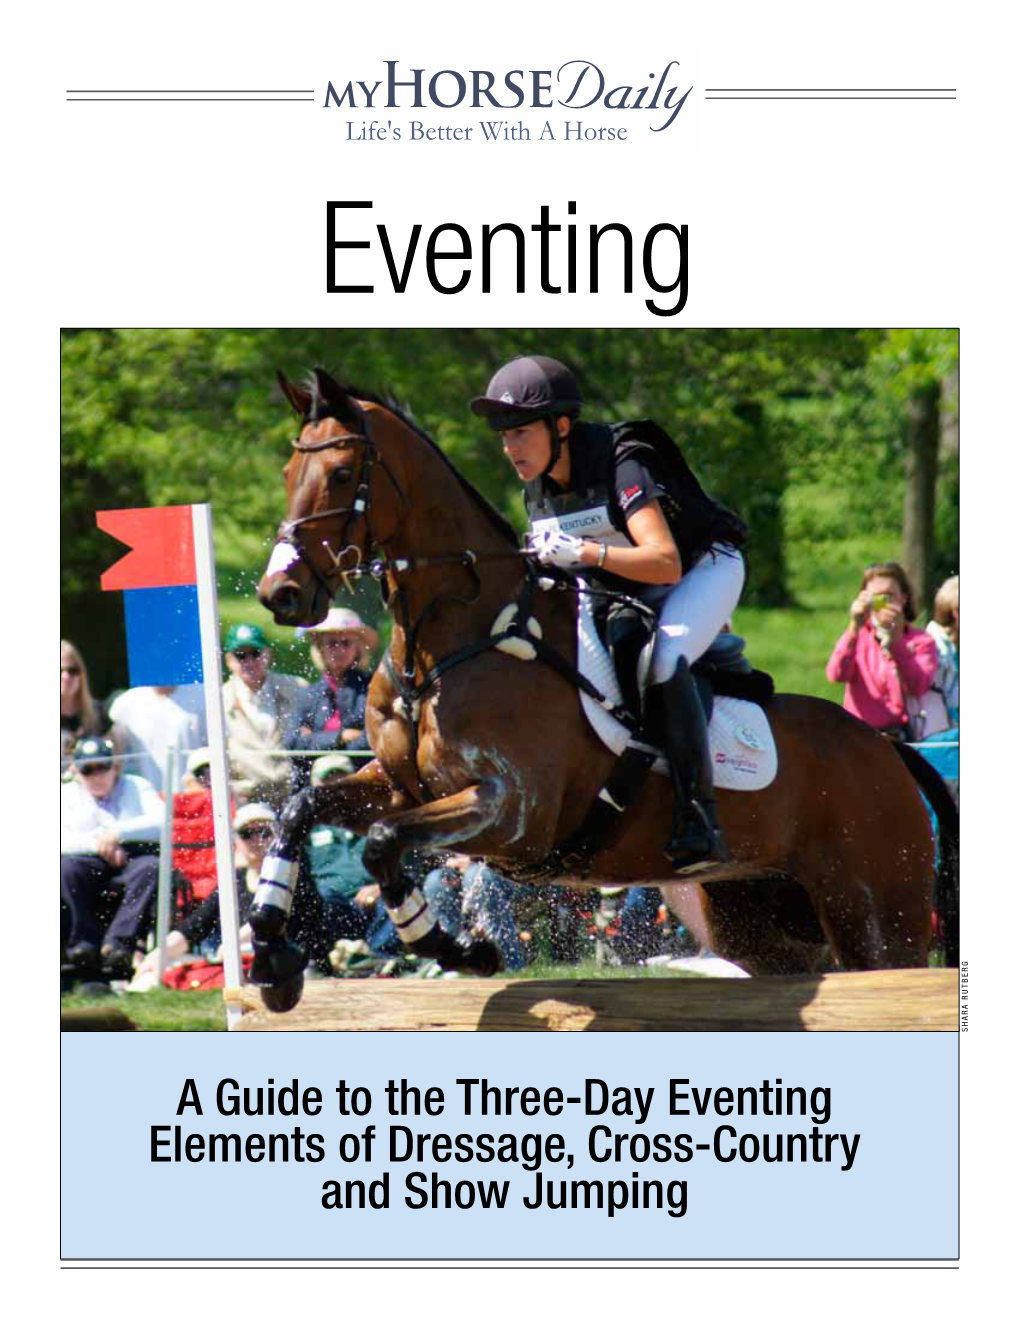 A Guide to the Three-Day Eventing Elements of Dressage, Cross-Country and Show Jumping a Note from the Editor